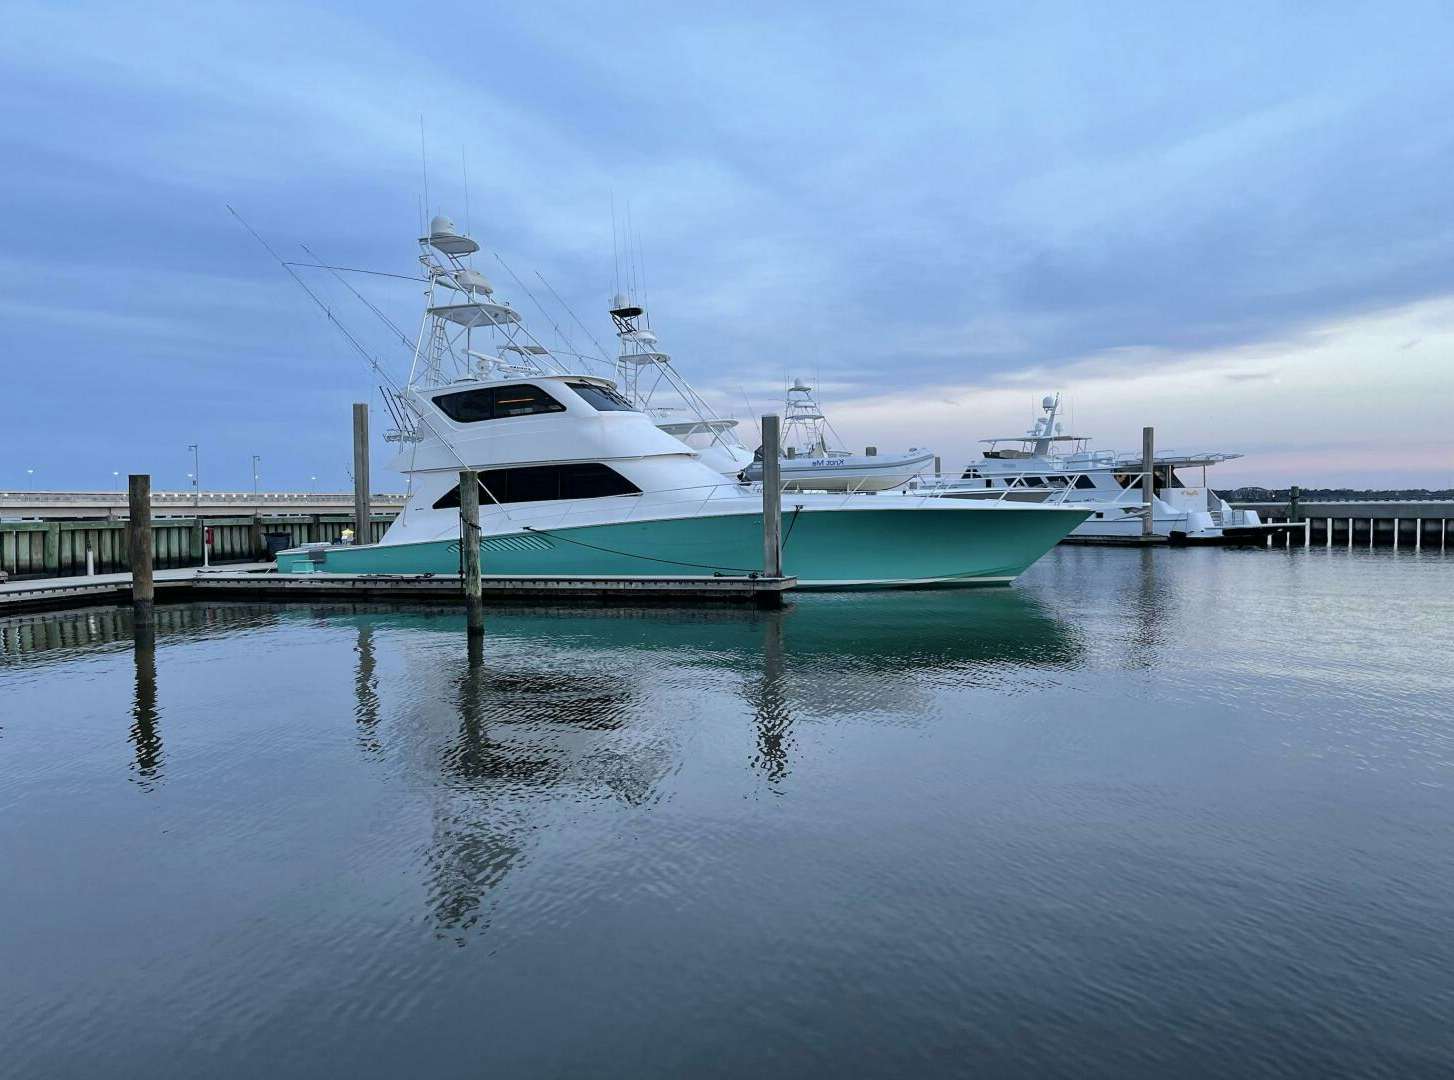 Berry blessed
Yacht for Sale